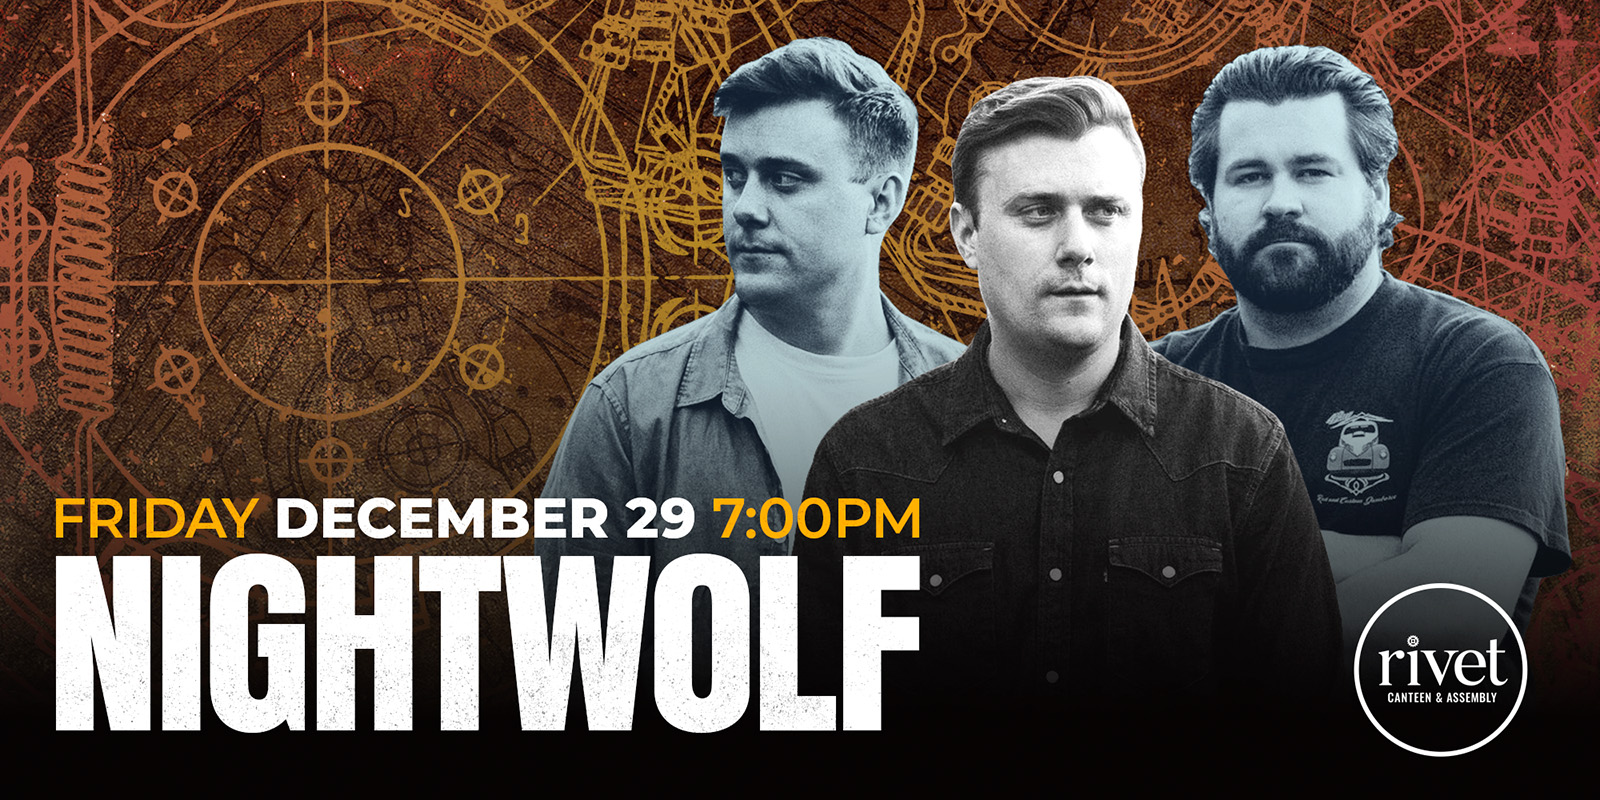 The classic three-piece rock n’ roll band NIGHTWOLF returns to Rivet on Friday, December 29th, 2023. Free to attend!